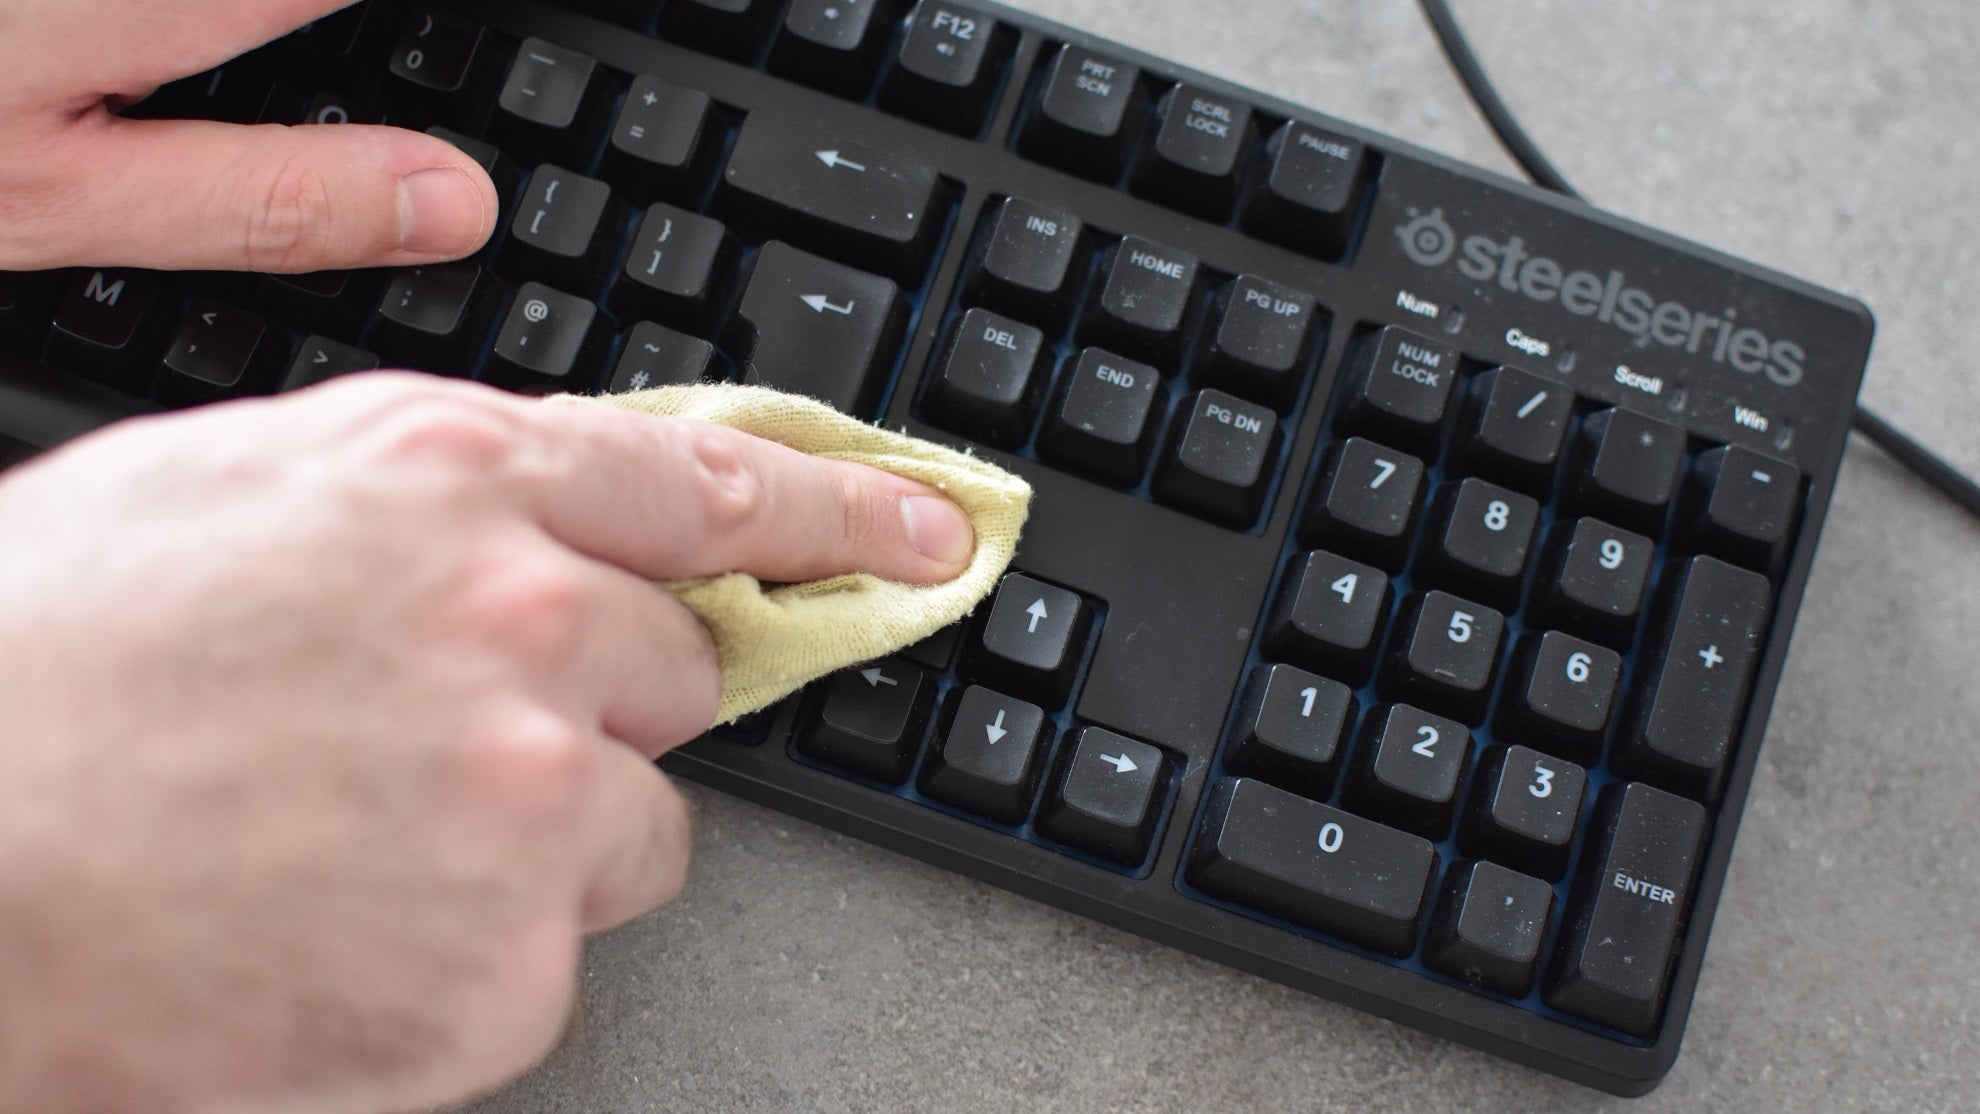 A keyboard being cleaned with a cloth.